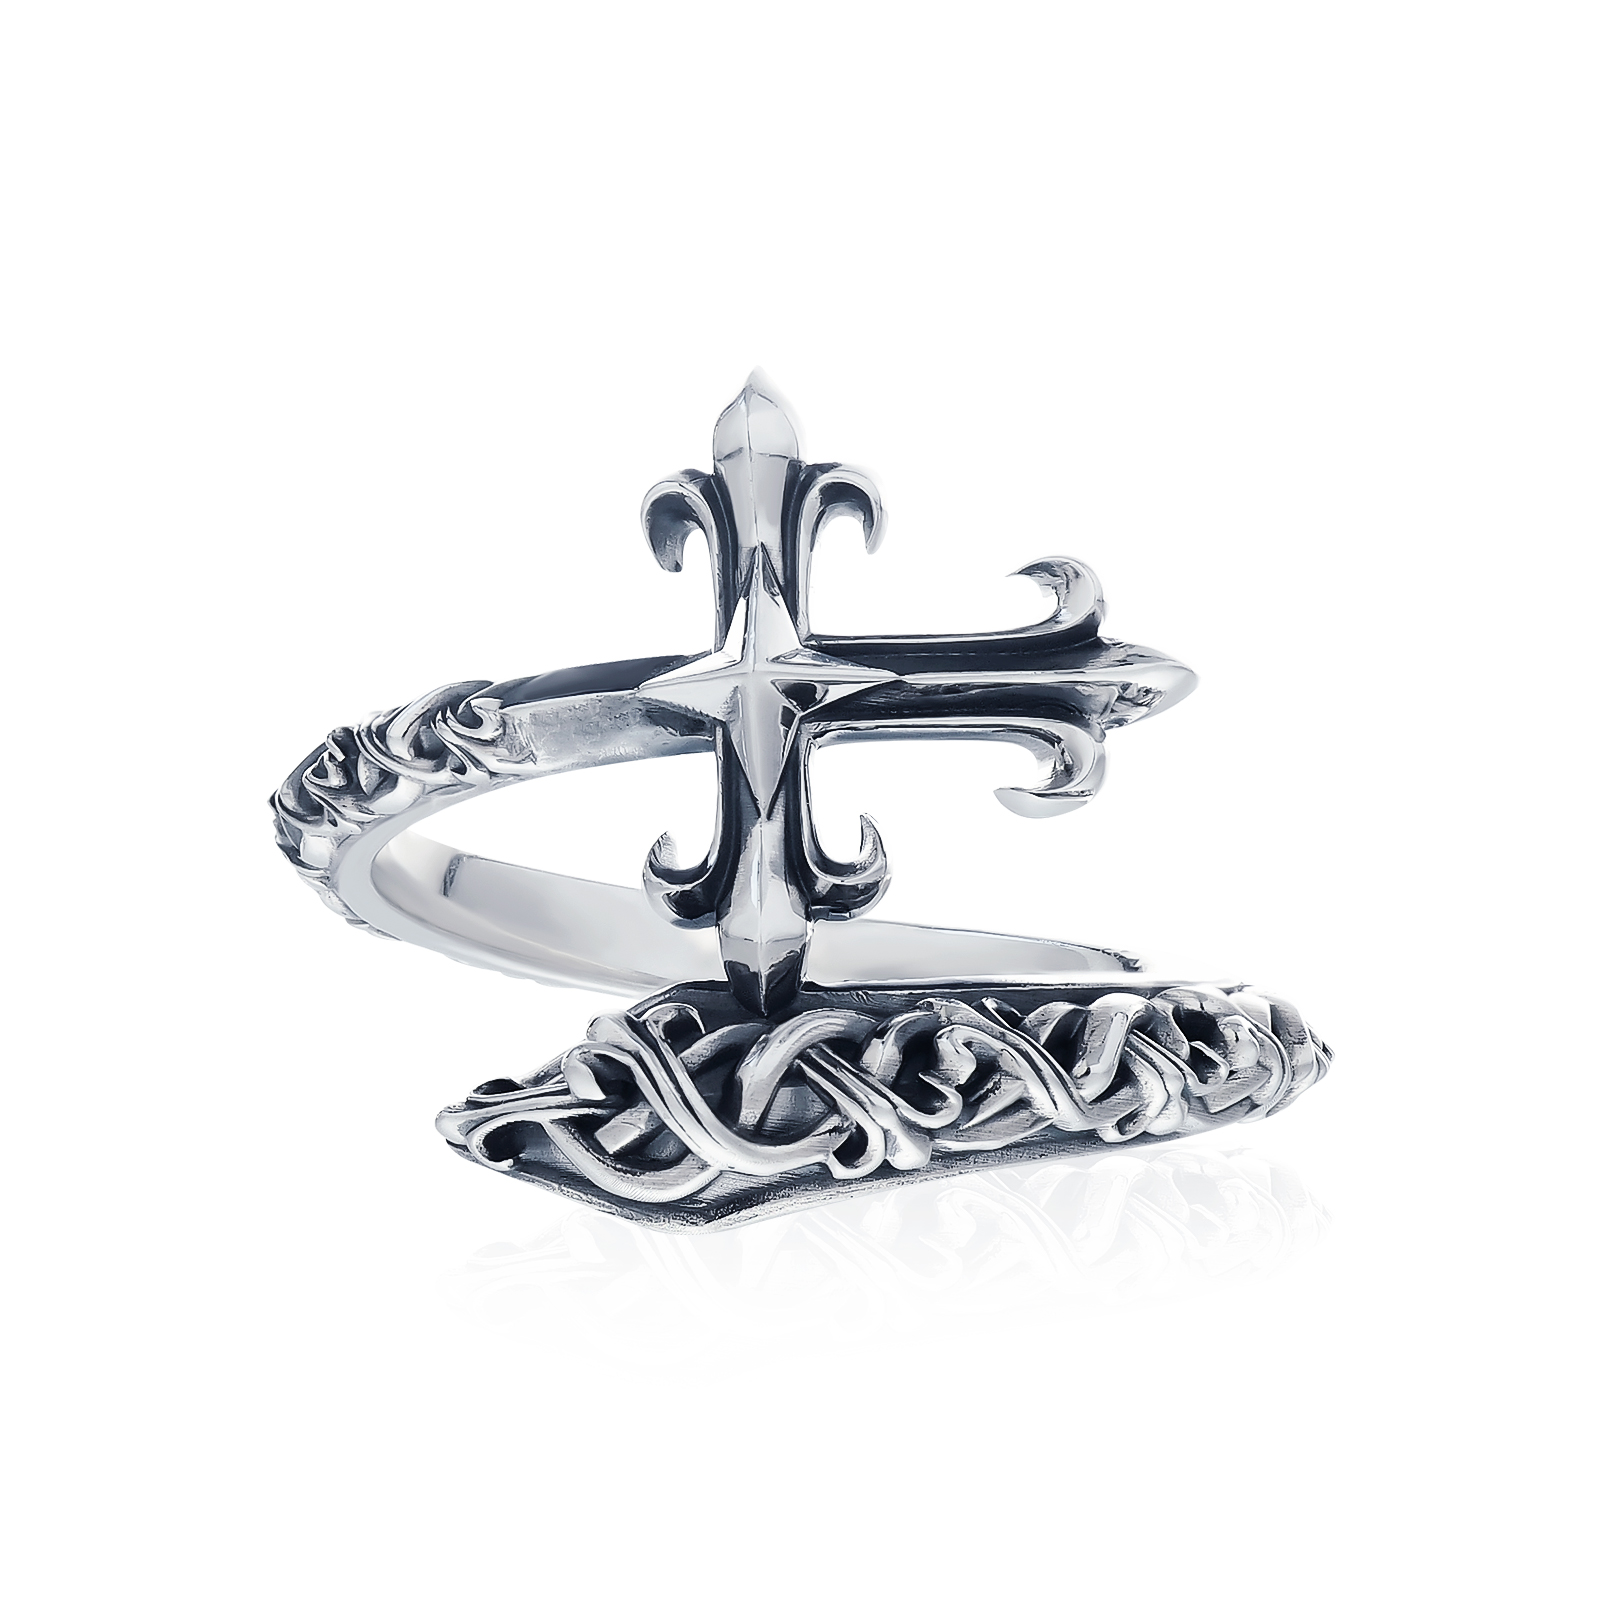 Prophet's Calibur Braided Twisted Ring